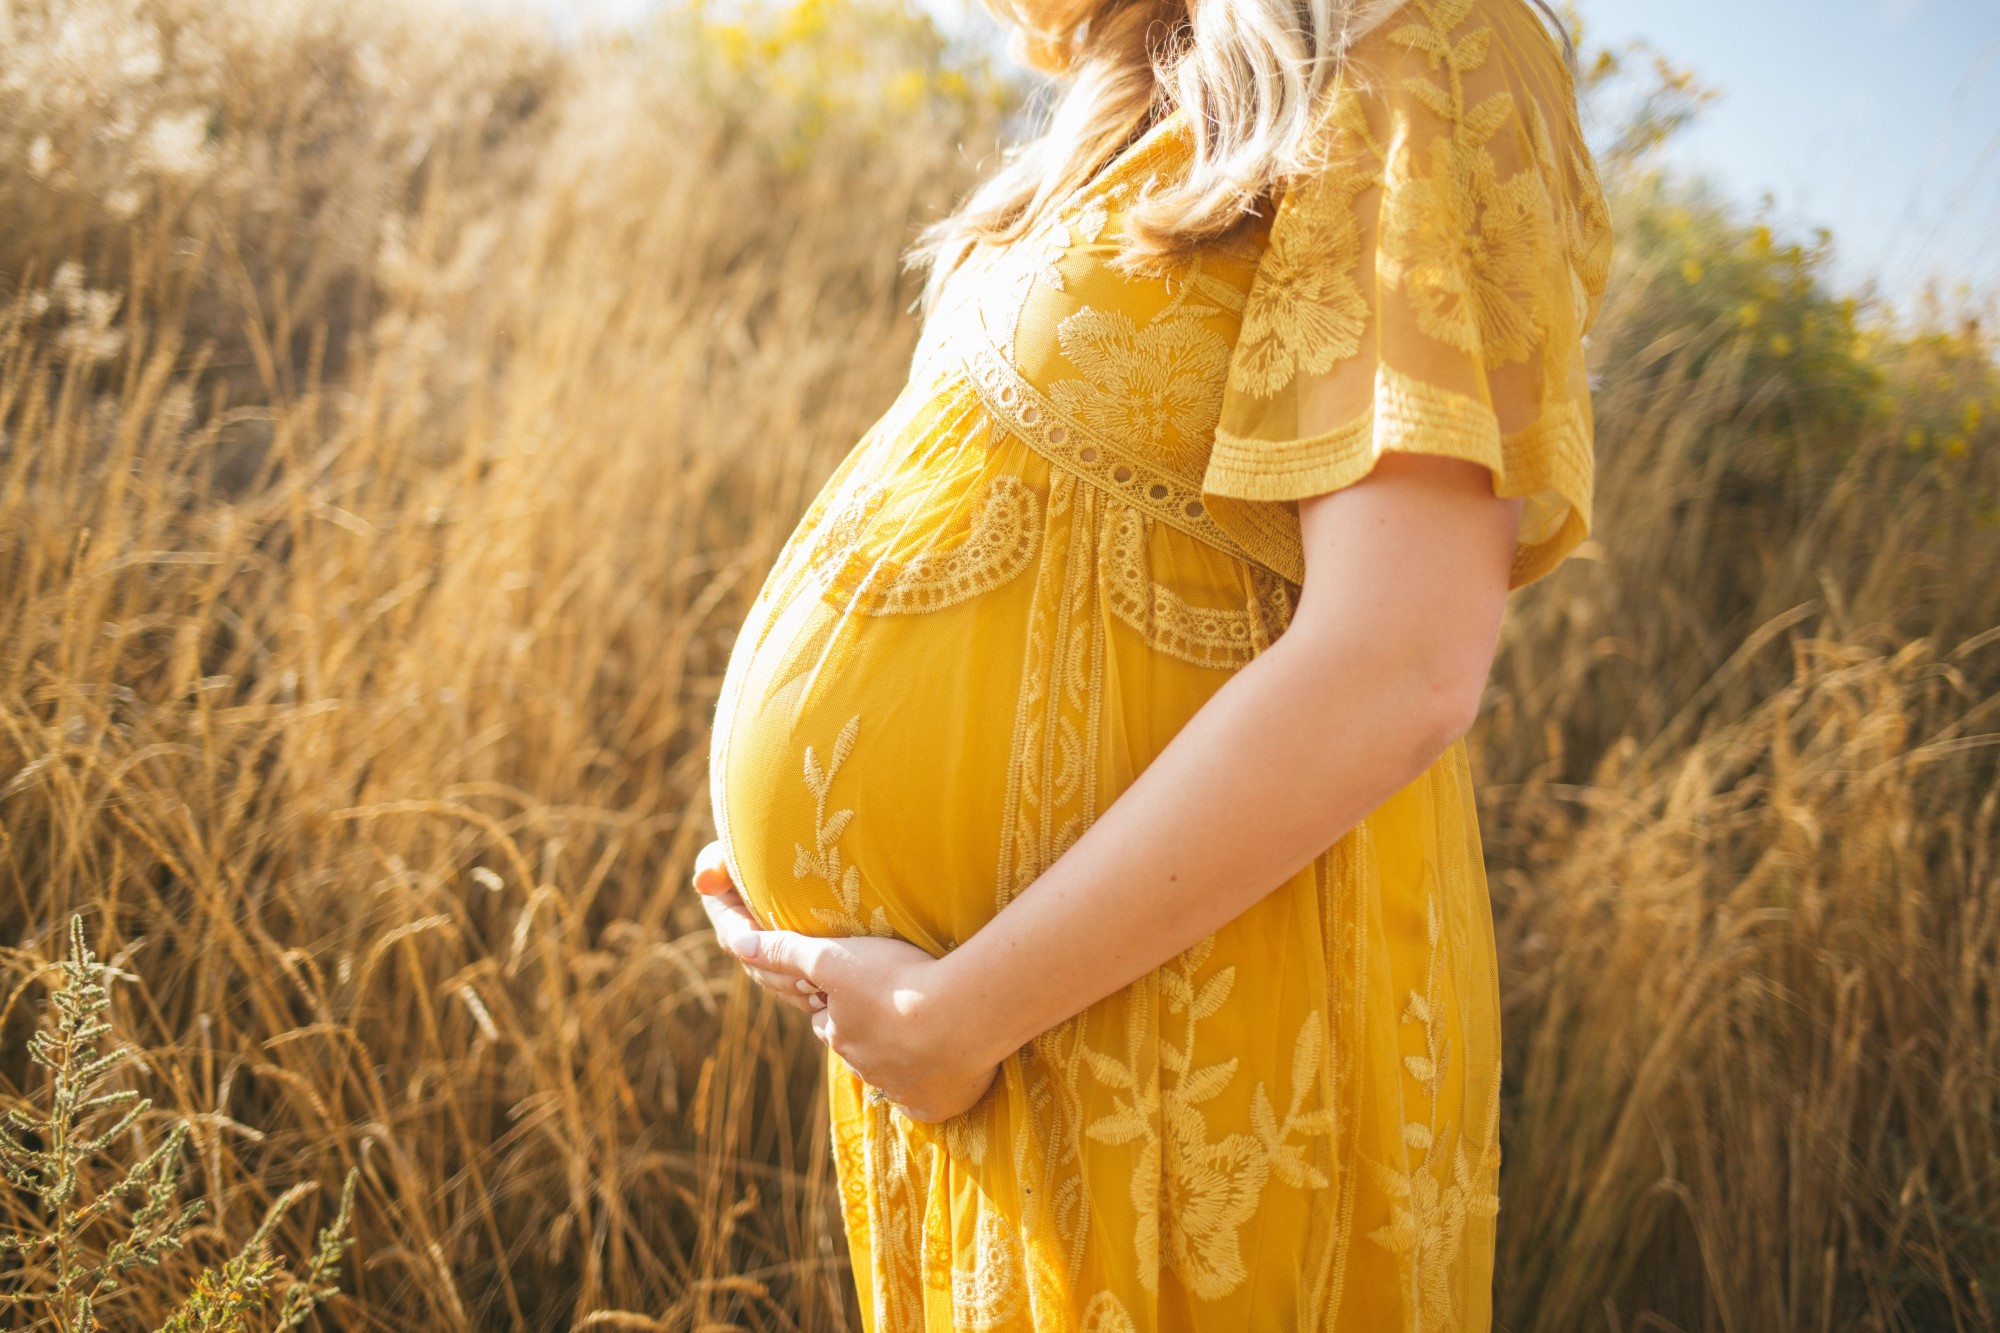 Woman in yellow dress in field holding her baby bump